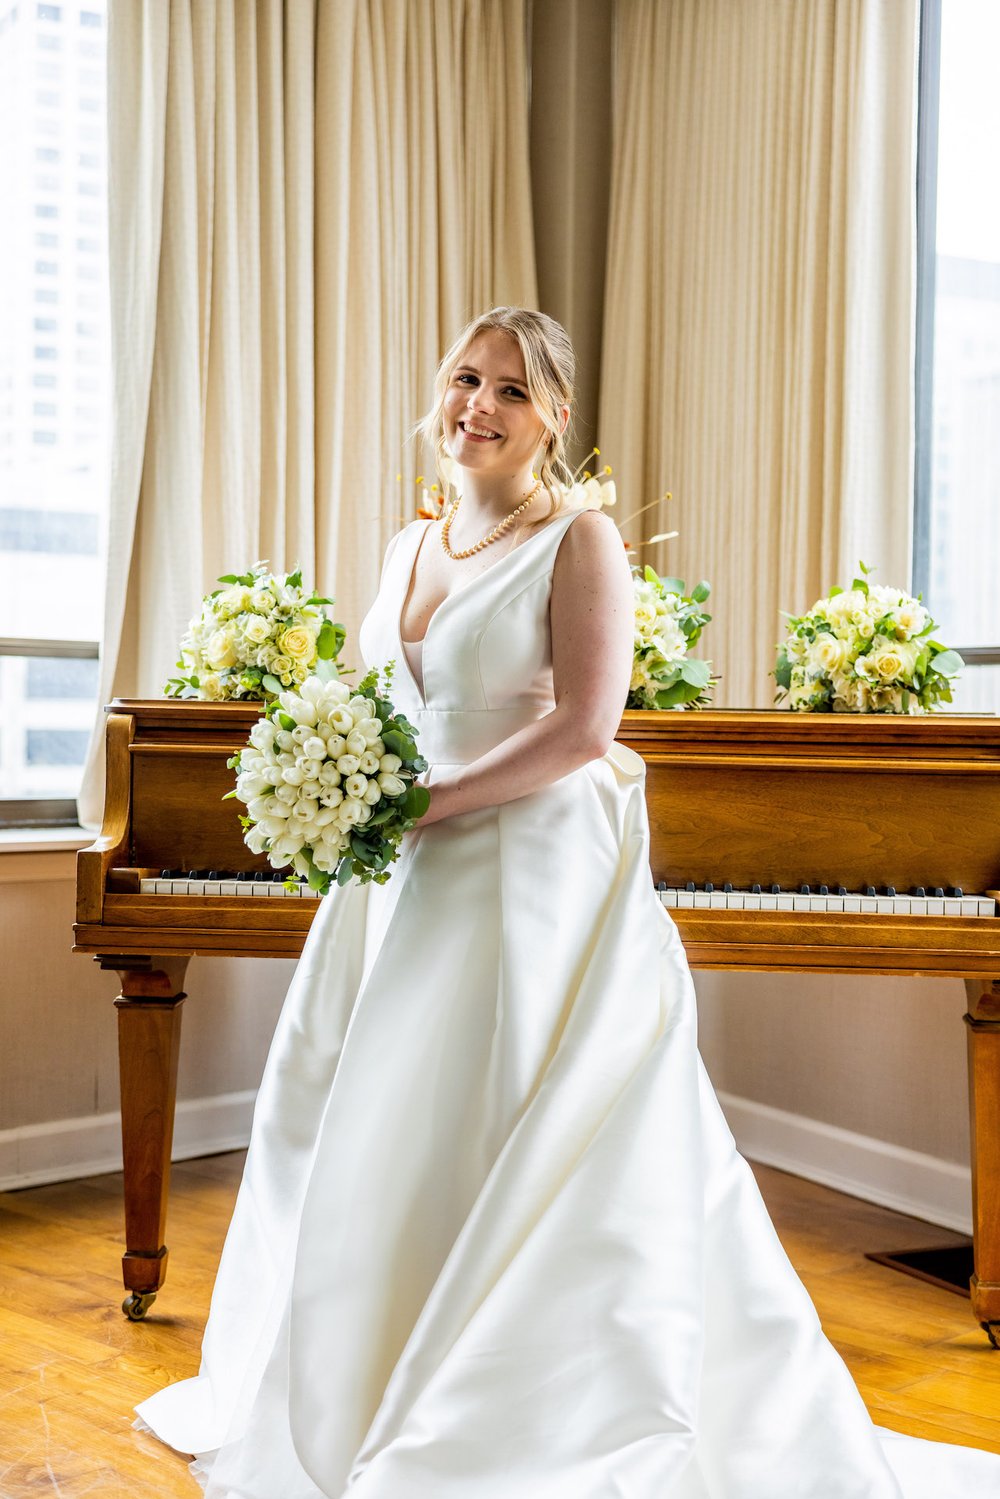  Alex Maldonado Photography | Chicago Wedding and lifestyle Photographer |  selina hotel bridal portraits in suite by piano 